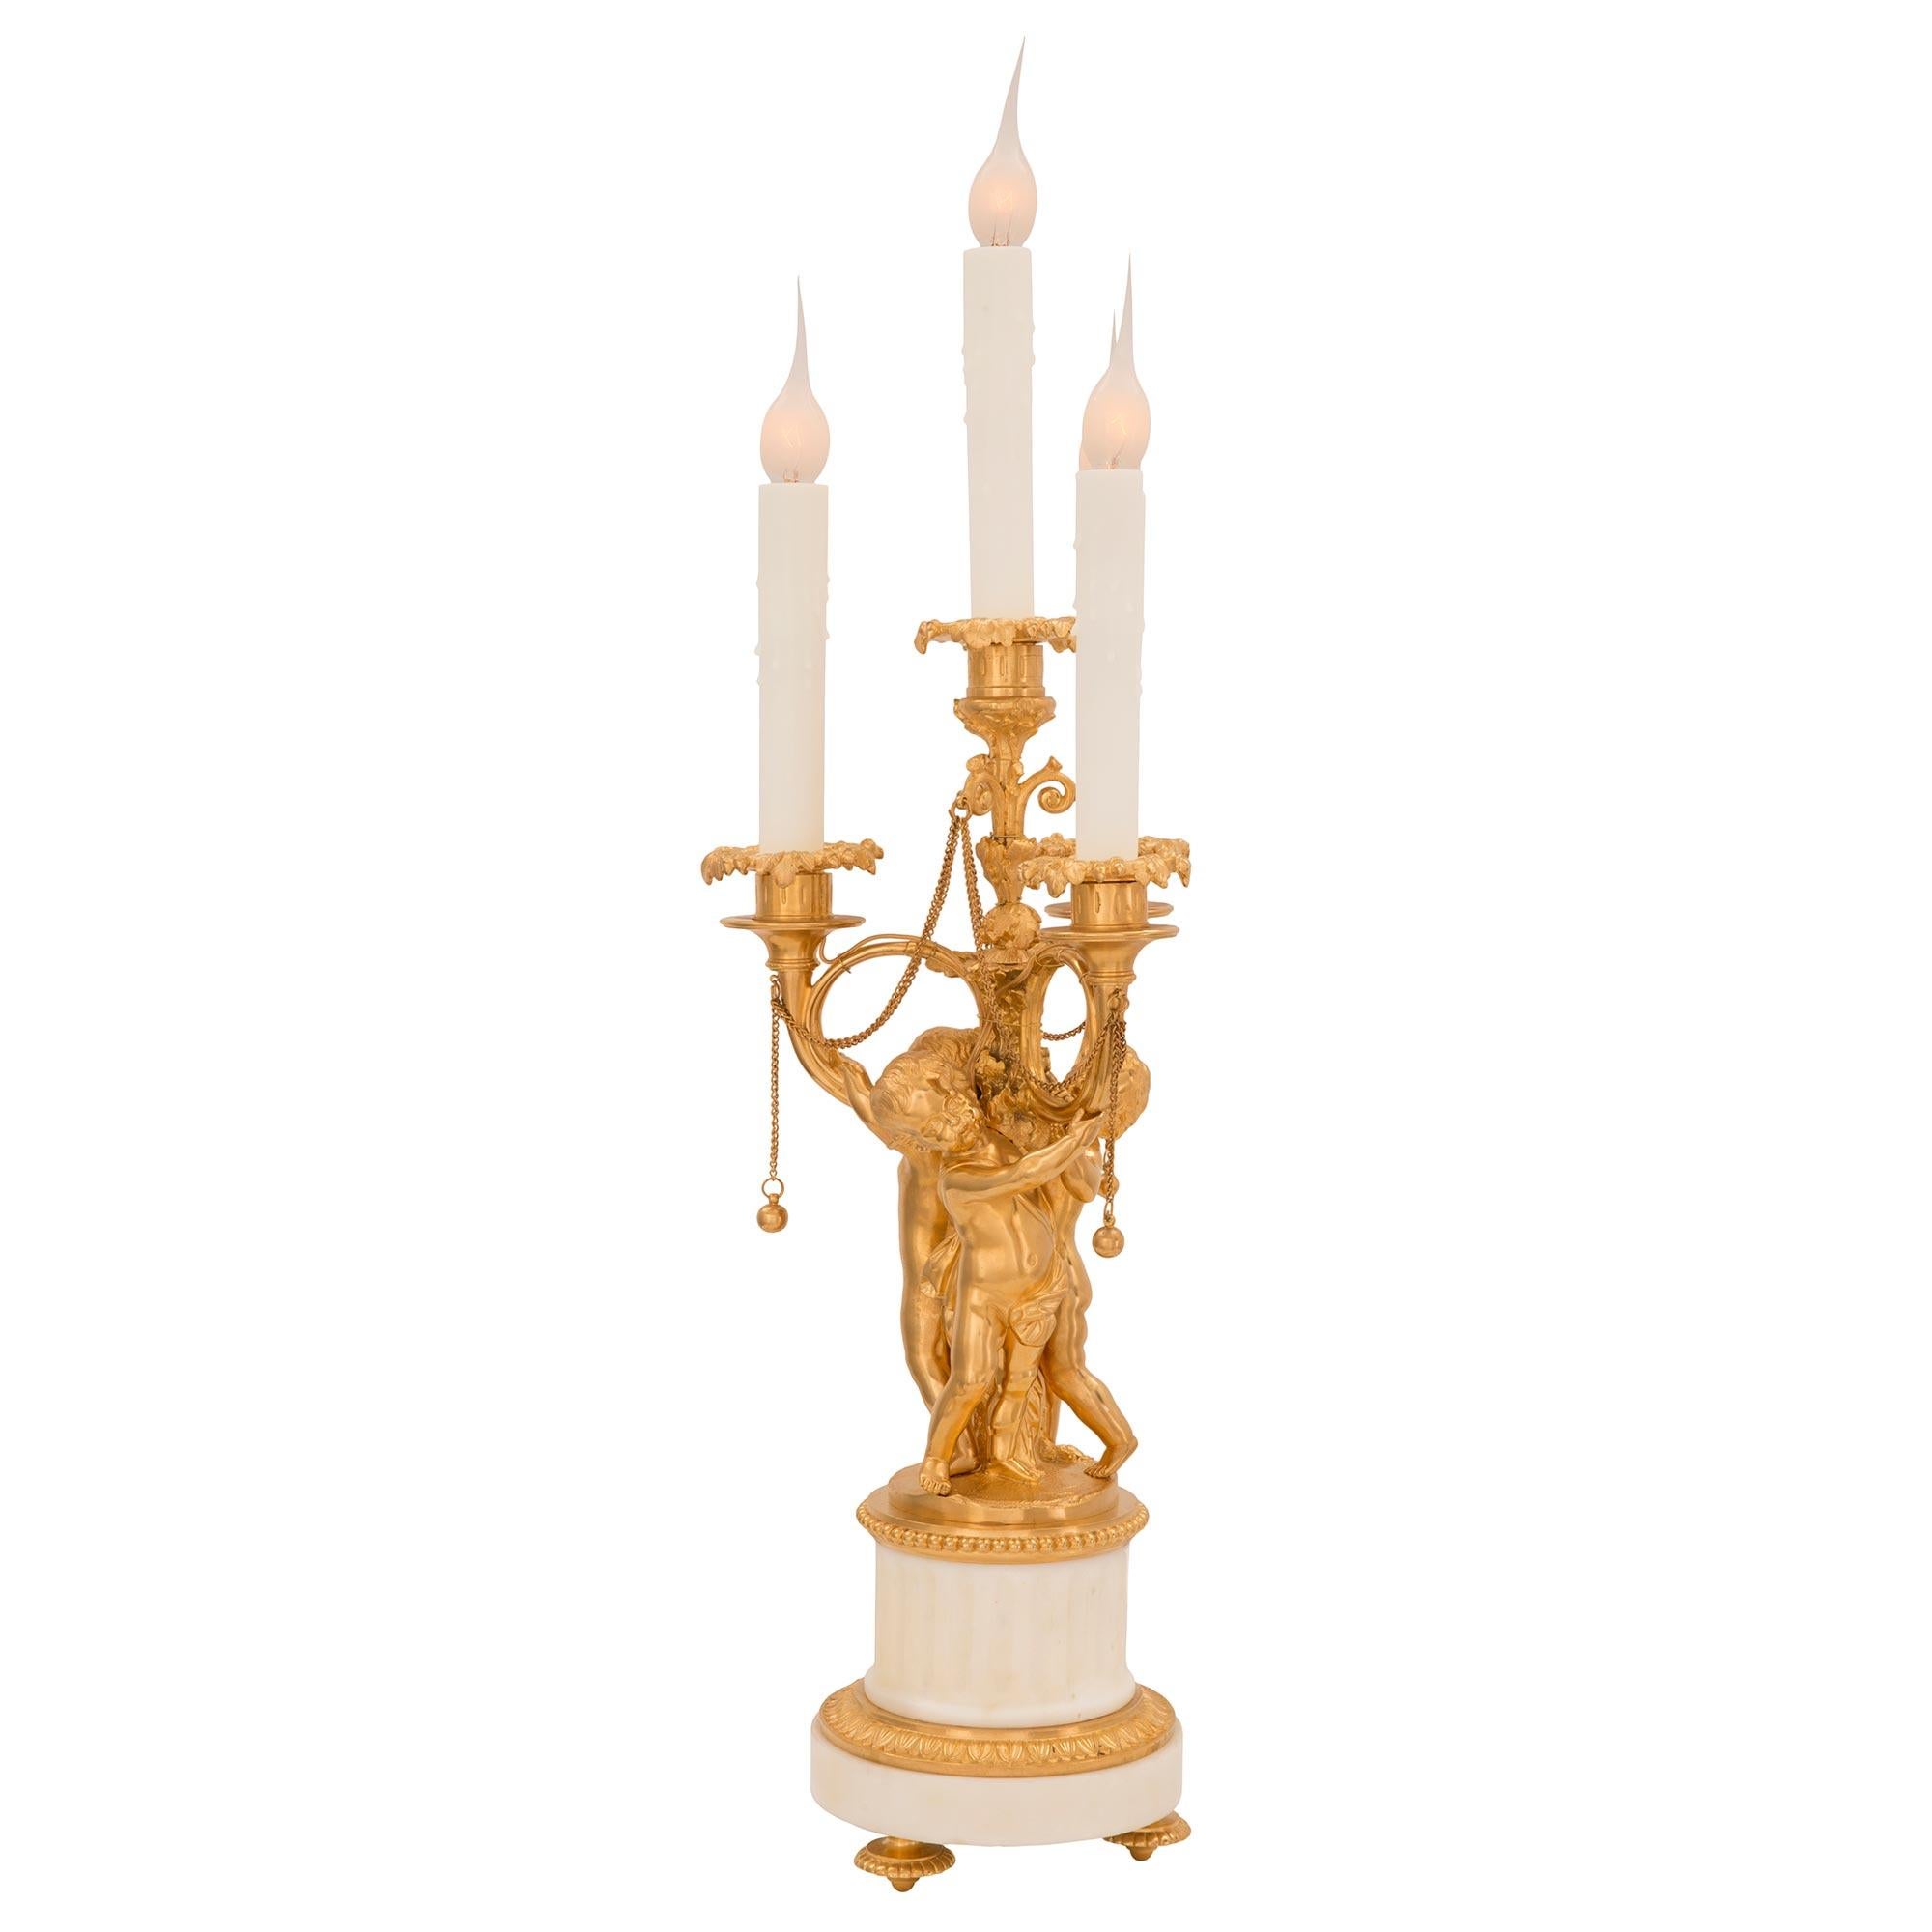 A most elegant pair of French 19th century Louis XVI st. Belle Époque period ormolu and White Carrara marble candelabra lamps. Each four arm lamp is raised by fine ormolu topie shaped feet below the circular white Carrara marble base decorated with